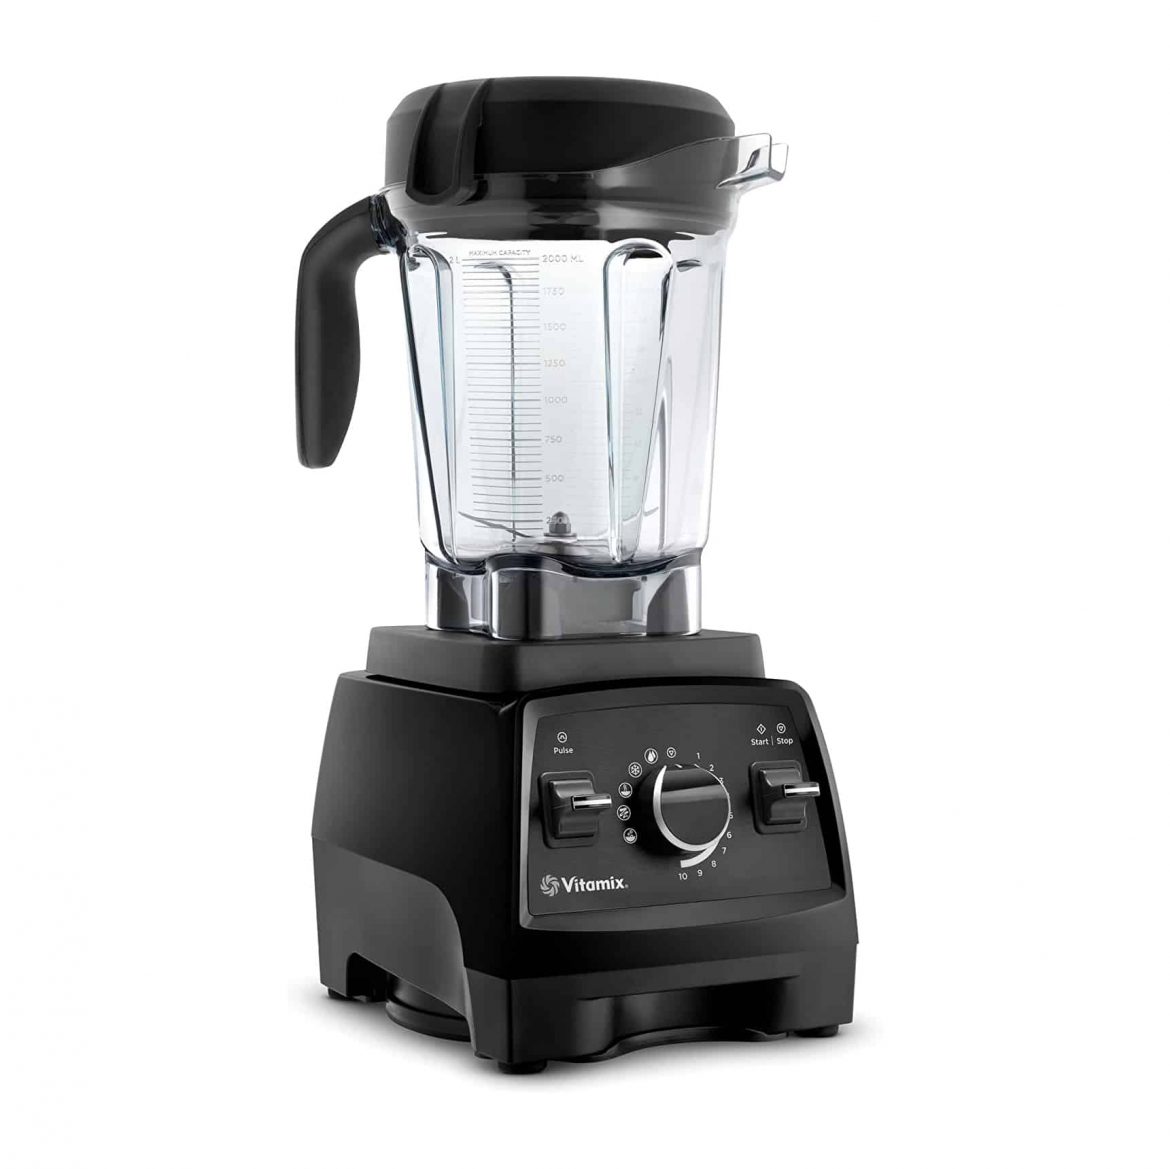 Top 10 Best Blender for Smoothie Bowls in 2021 Reviews | Buyer's Guide